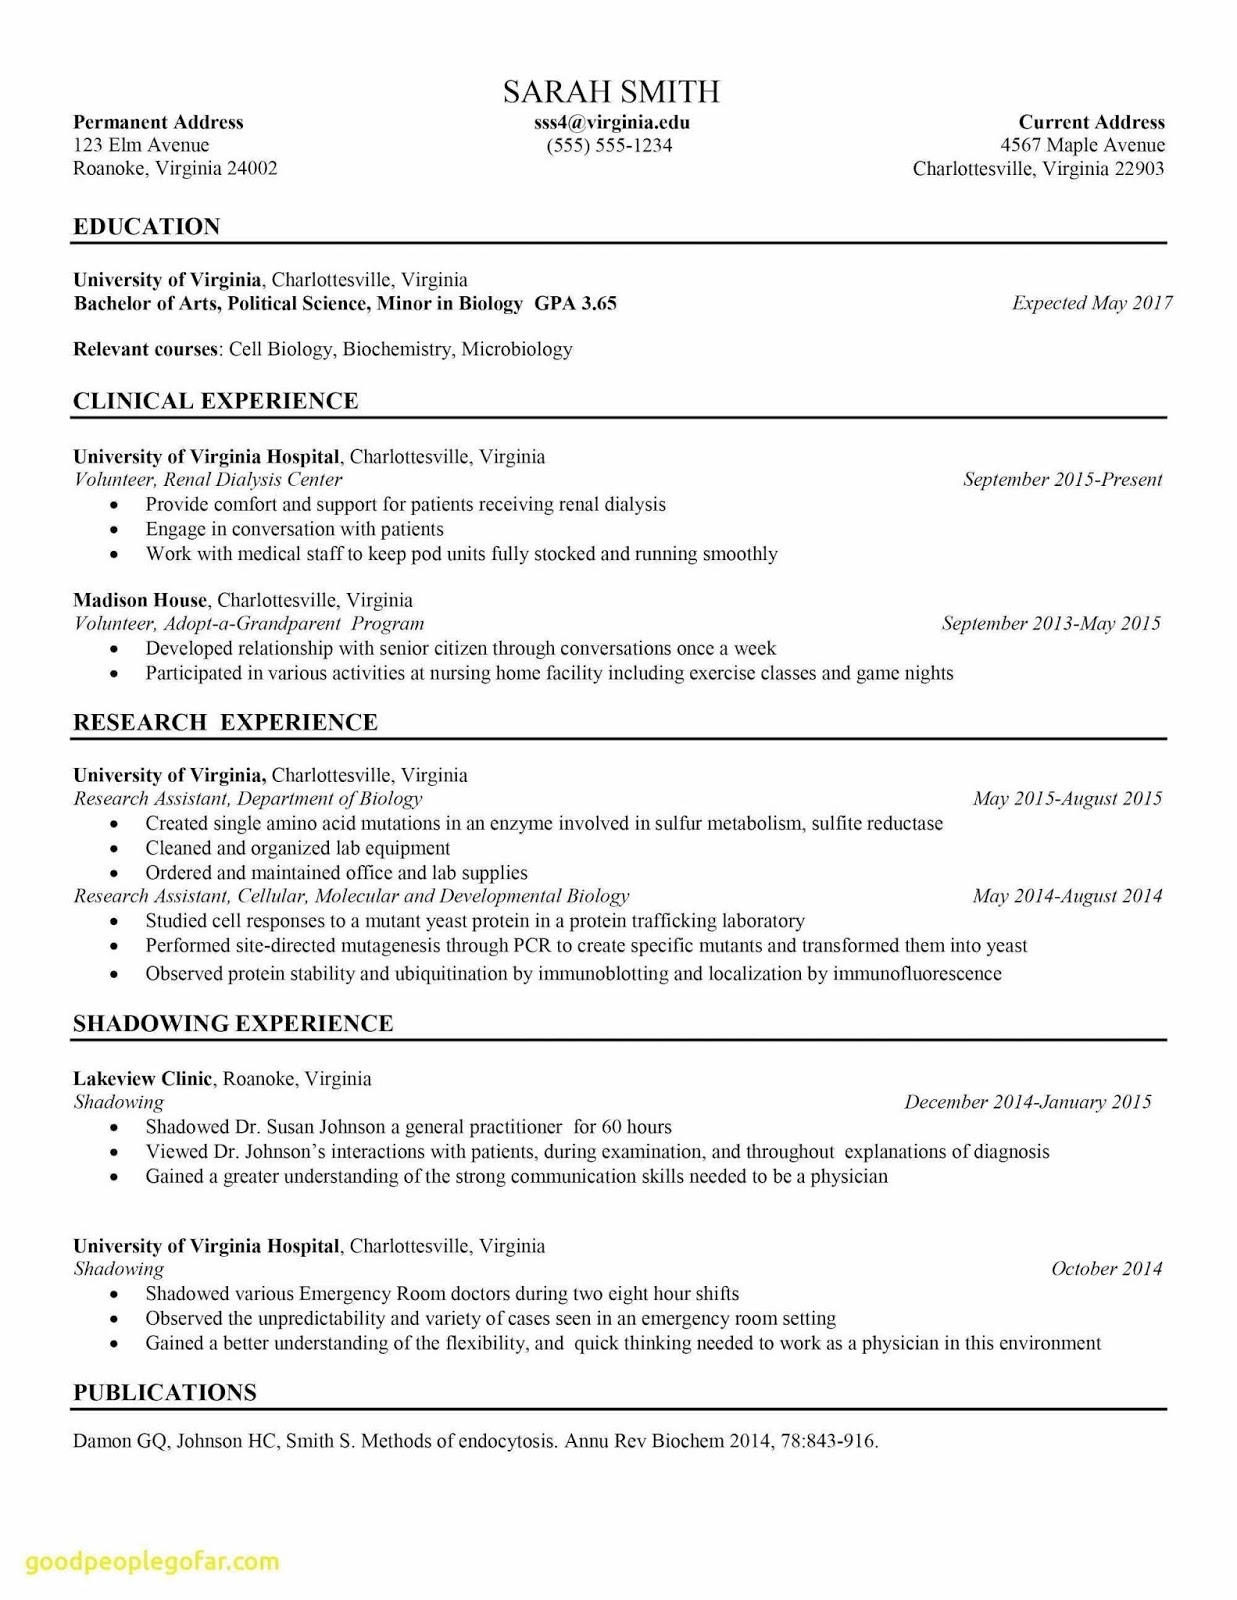 Bakery Manager Resume Examples 2019 Bakery Manager Resume Skills 2020 bakery manager resume examples bakery manager resume skills bakery manager resume objective 2019 bakery production manager resume bakery general manager